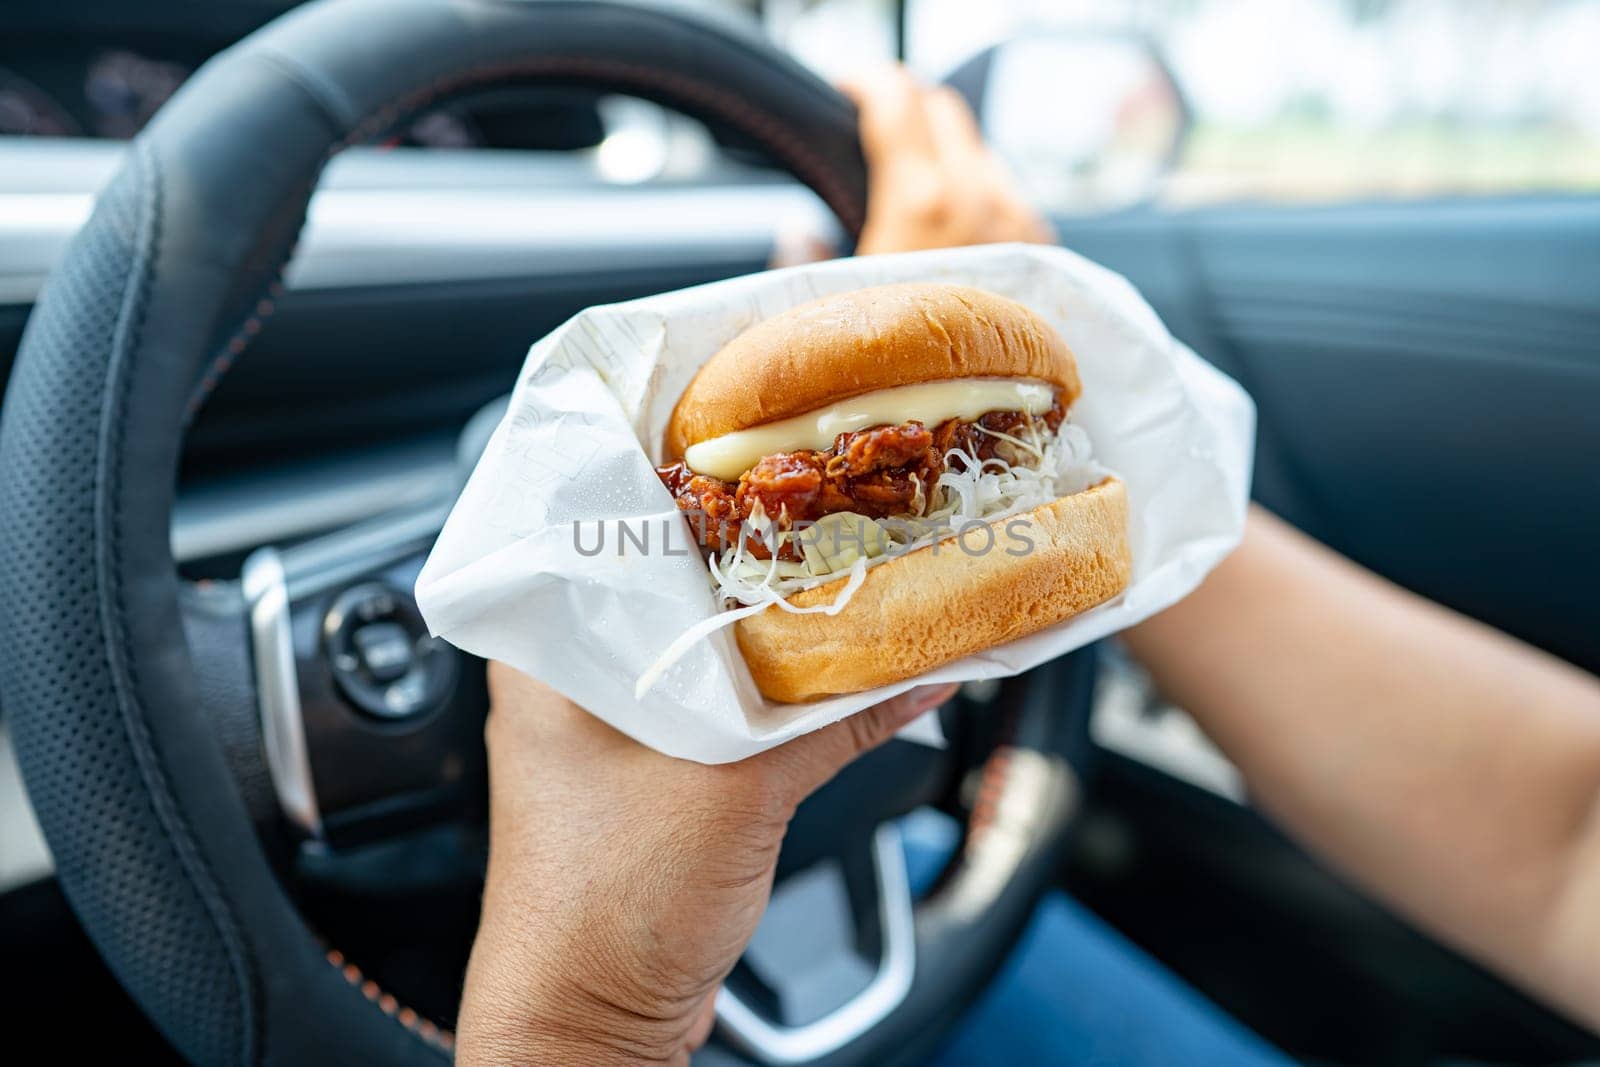 Asian lady holding hamburger to eat in car, dangerous and risk an accident. by pamai